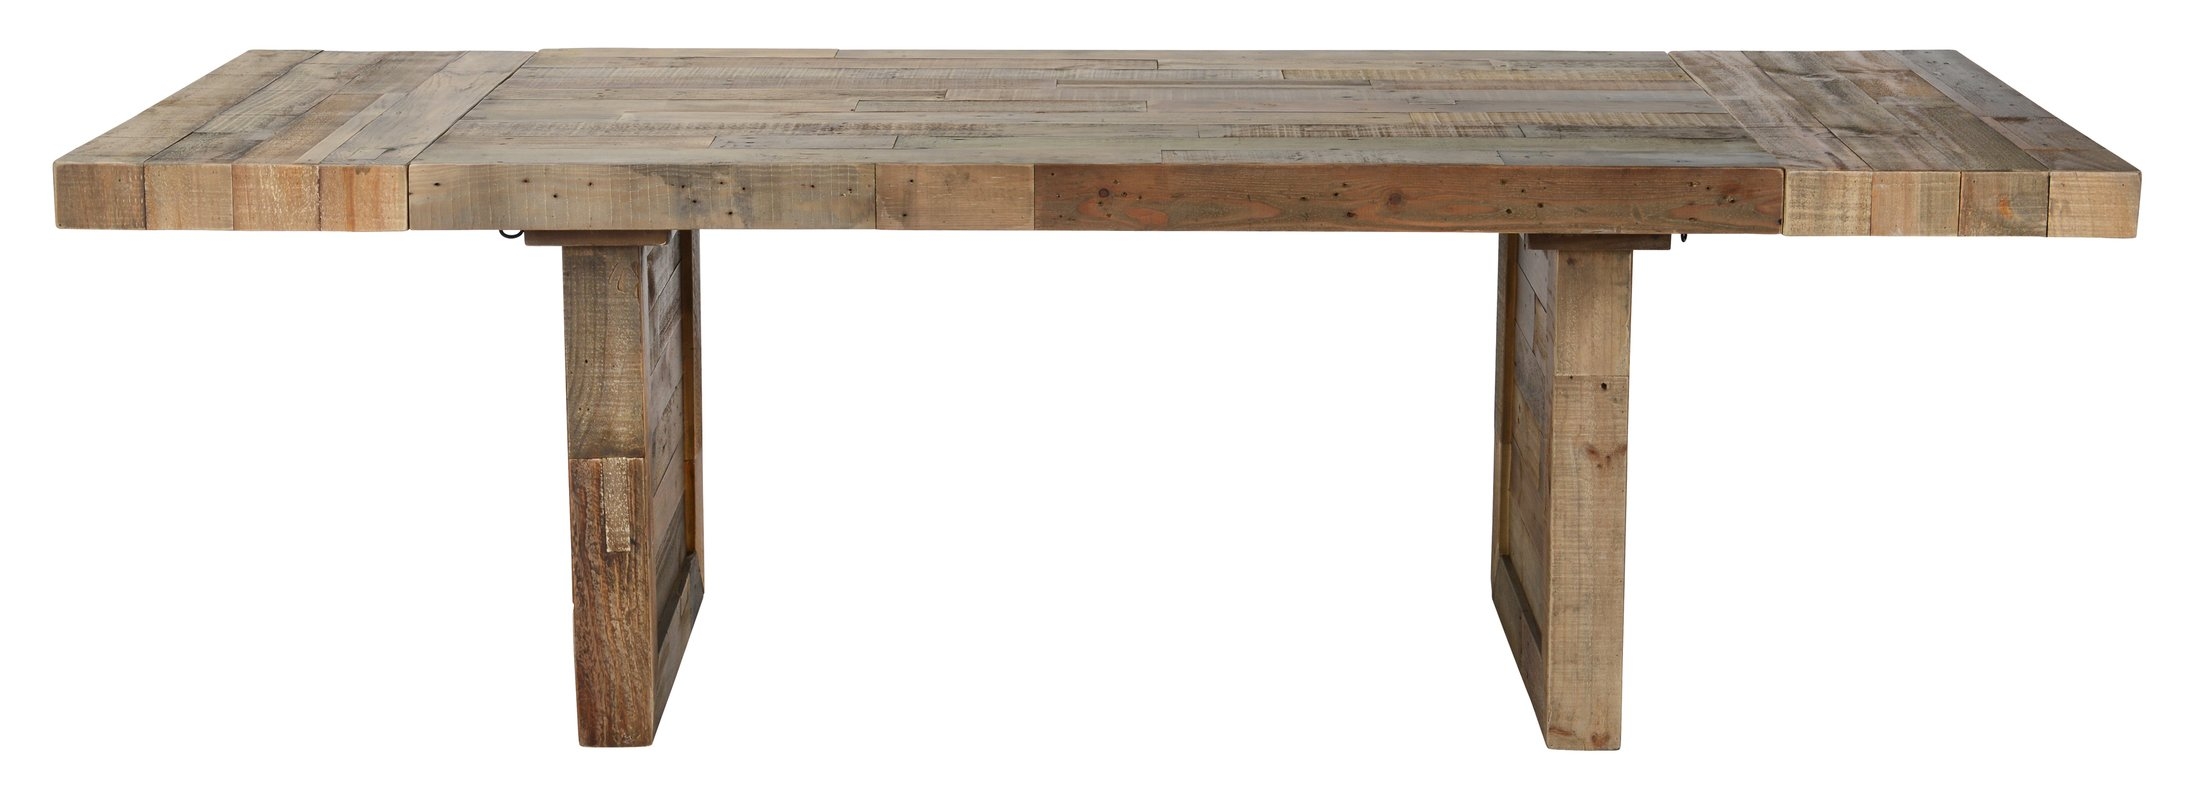 Abbey Extendable Dining Table - Image 1